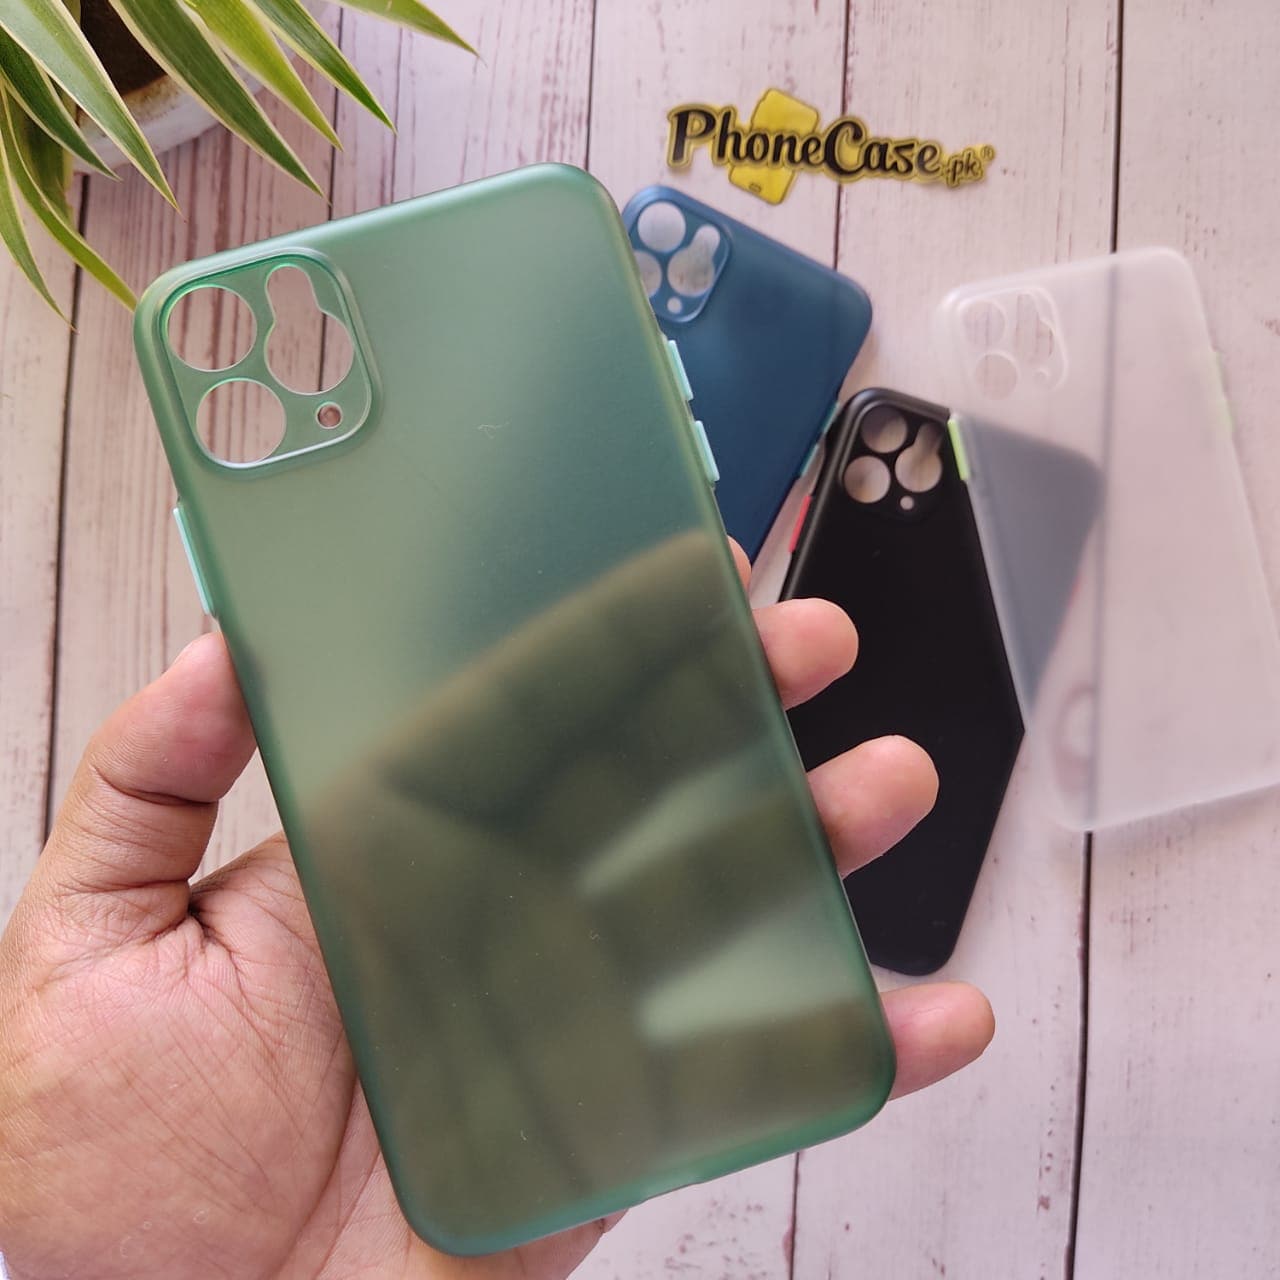 iPhone X/XS Ultra thin Shock Proof Frosted Case